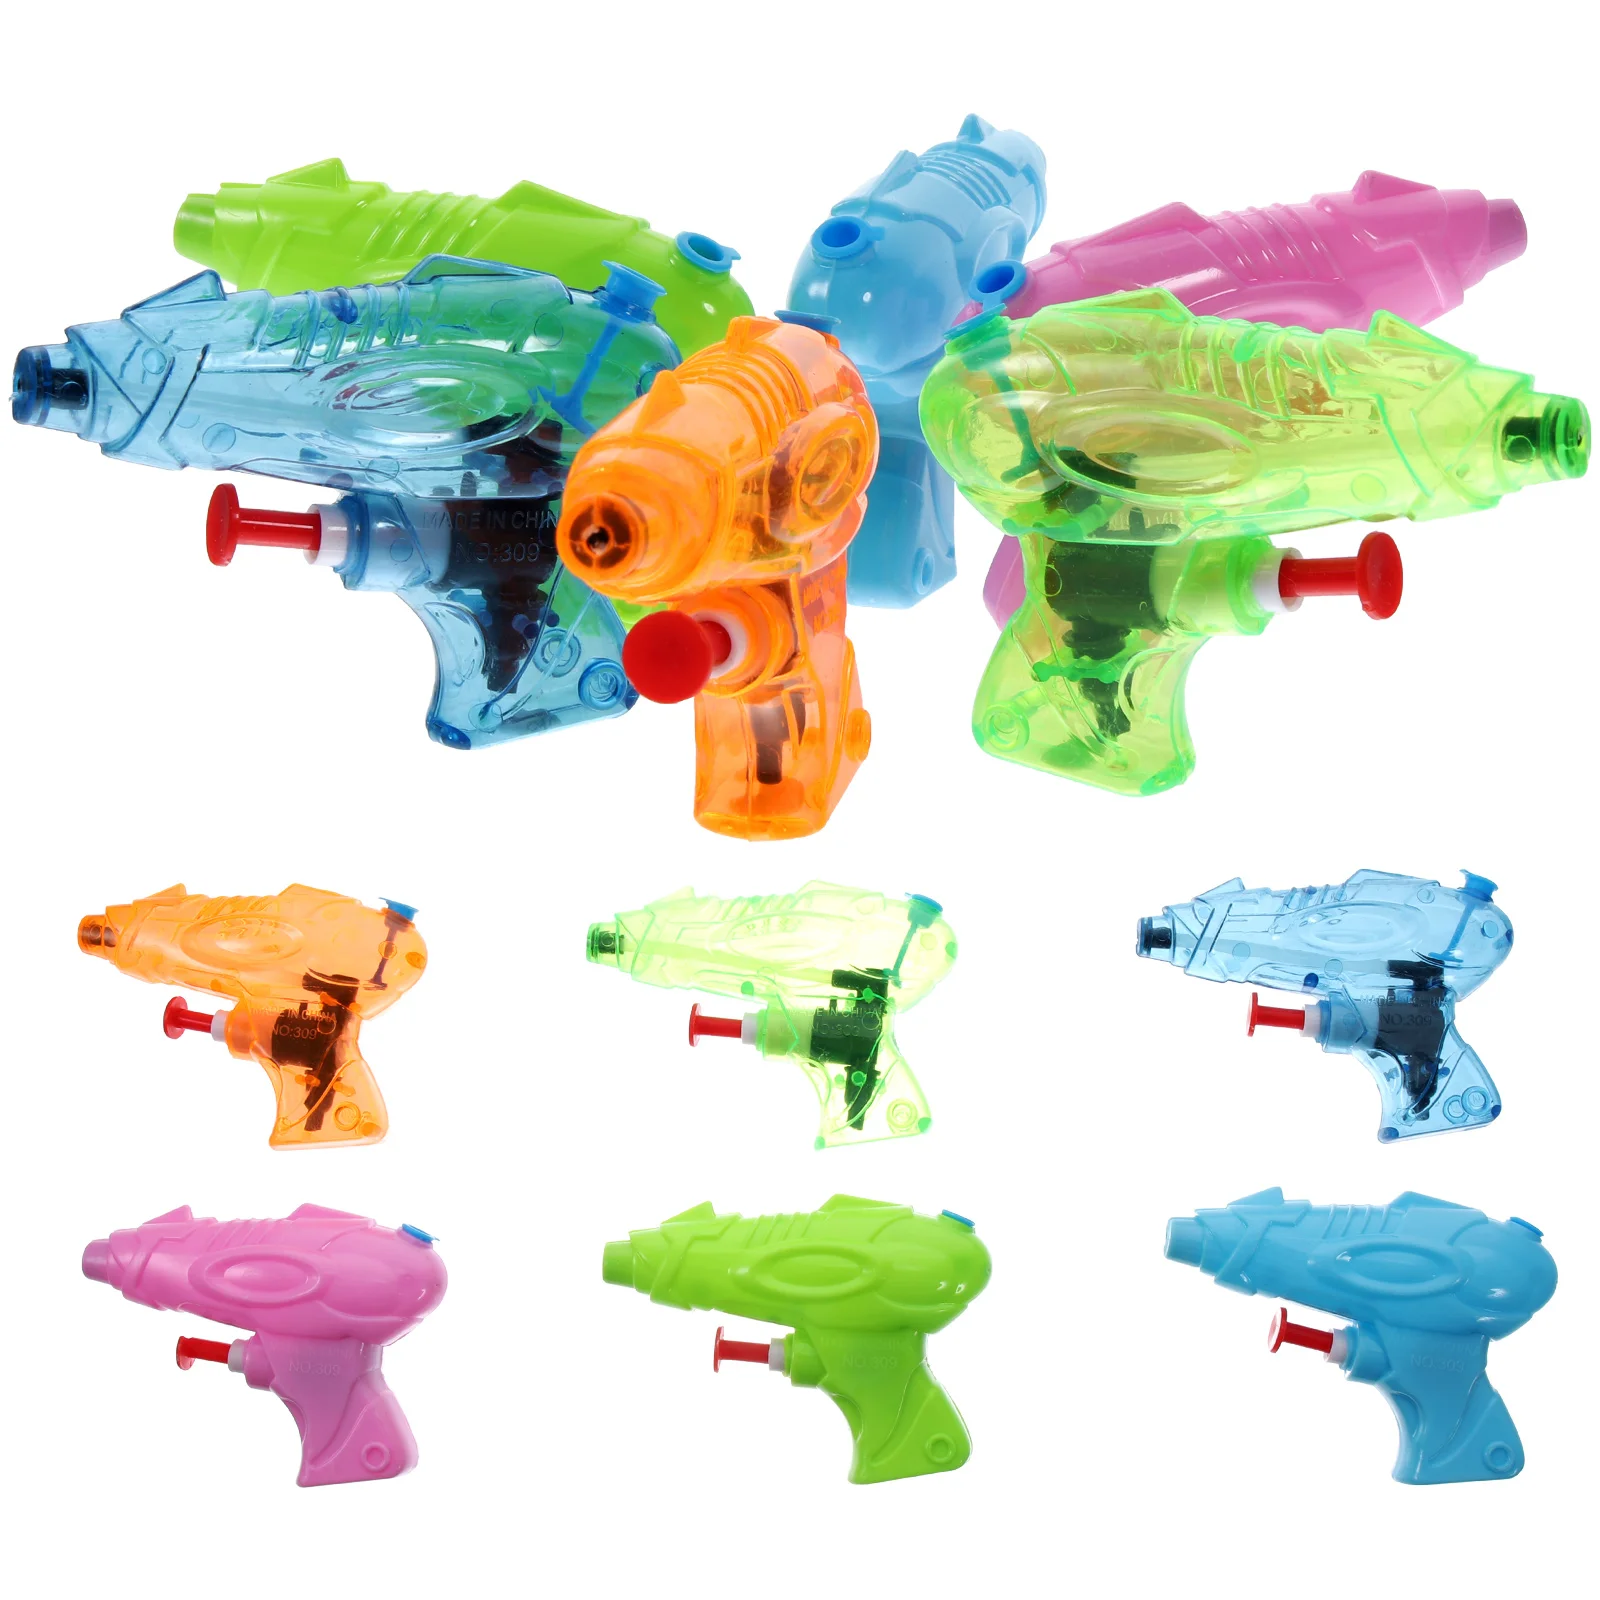 Mini Water Guns Shooter Toy Summer Swimming Pool Toy Pool Beach Spray To... - $14.90